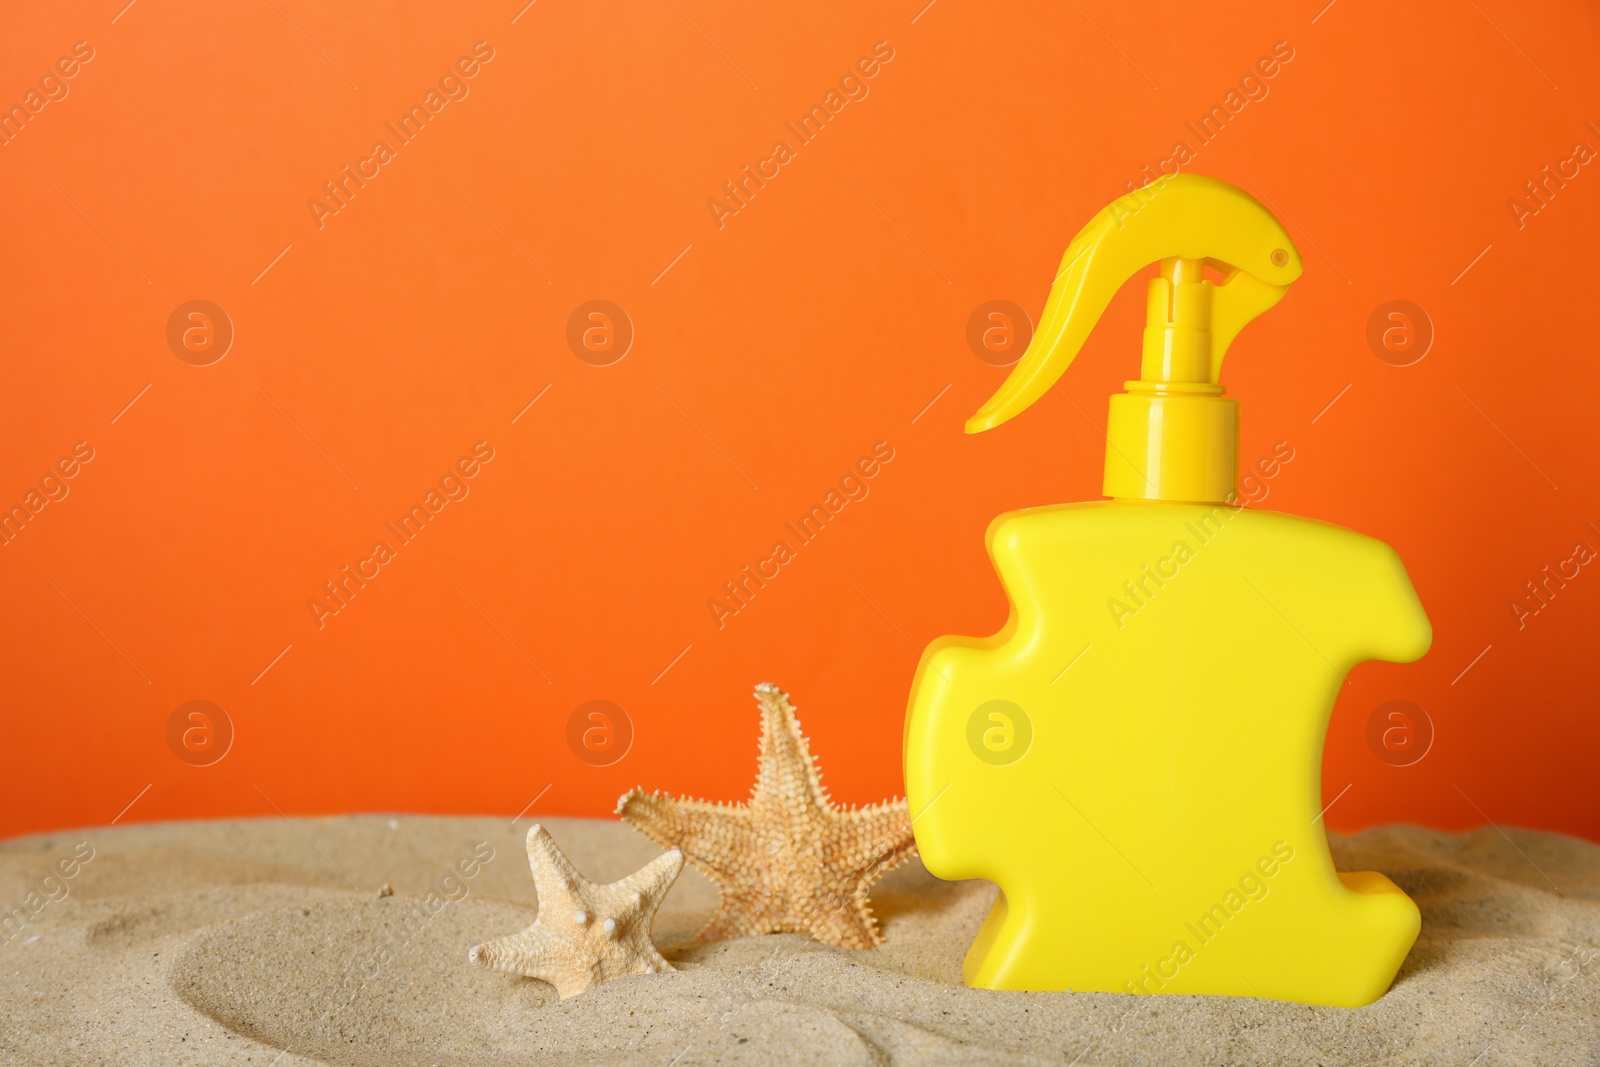 Photo of Suntan product and starfishes on sand against orange background. Space for text